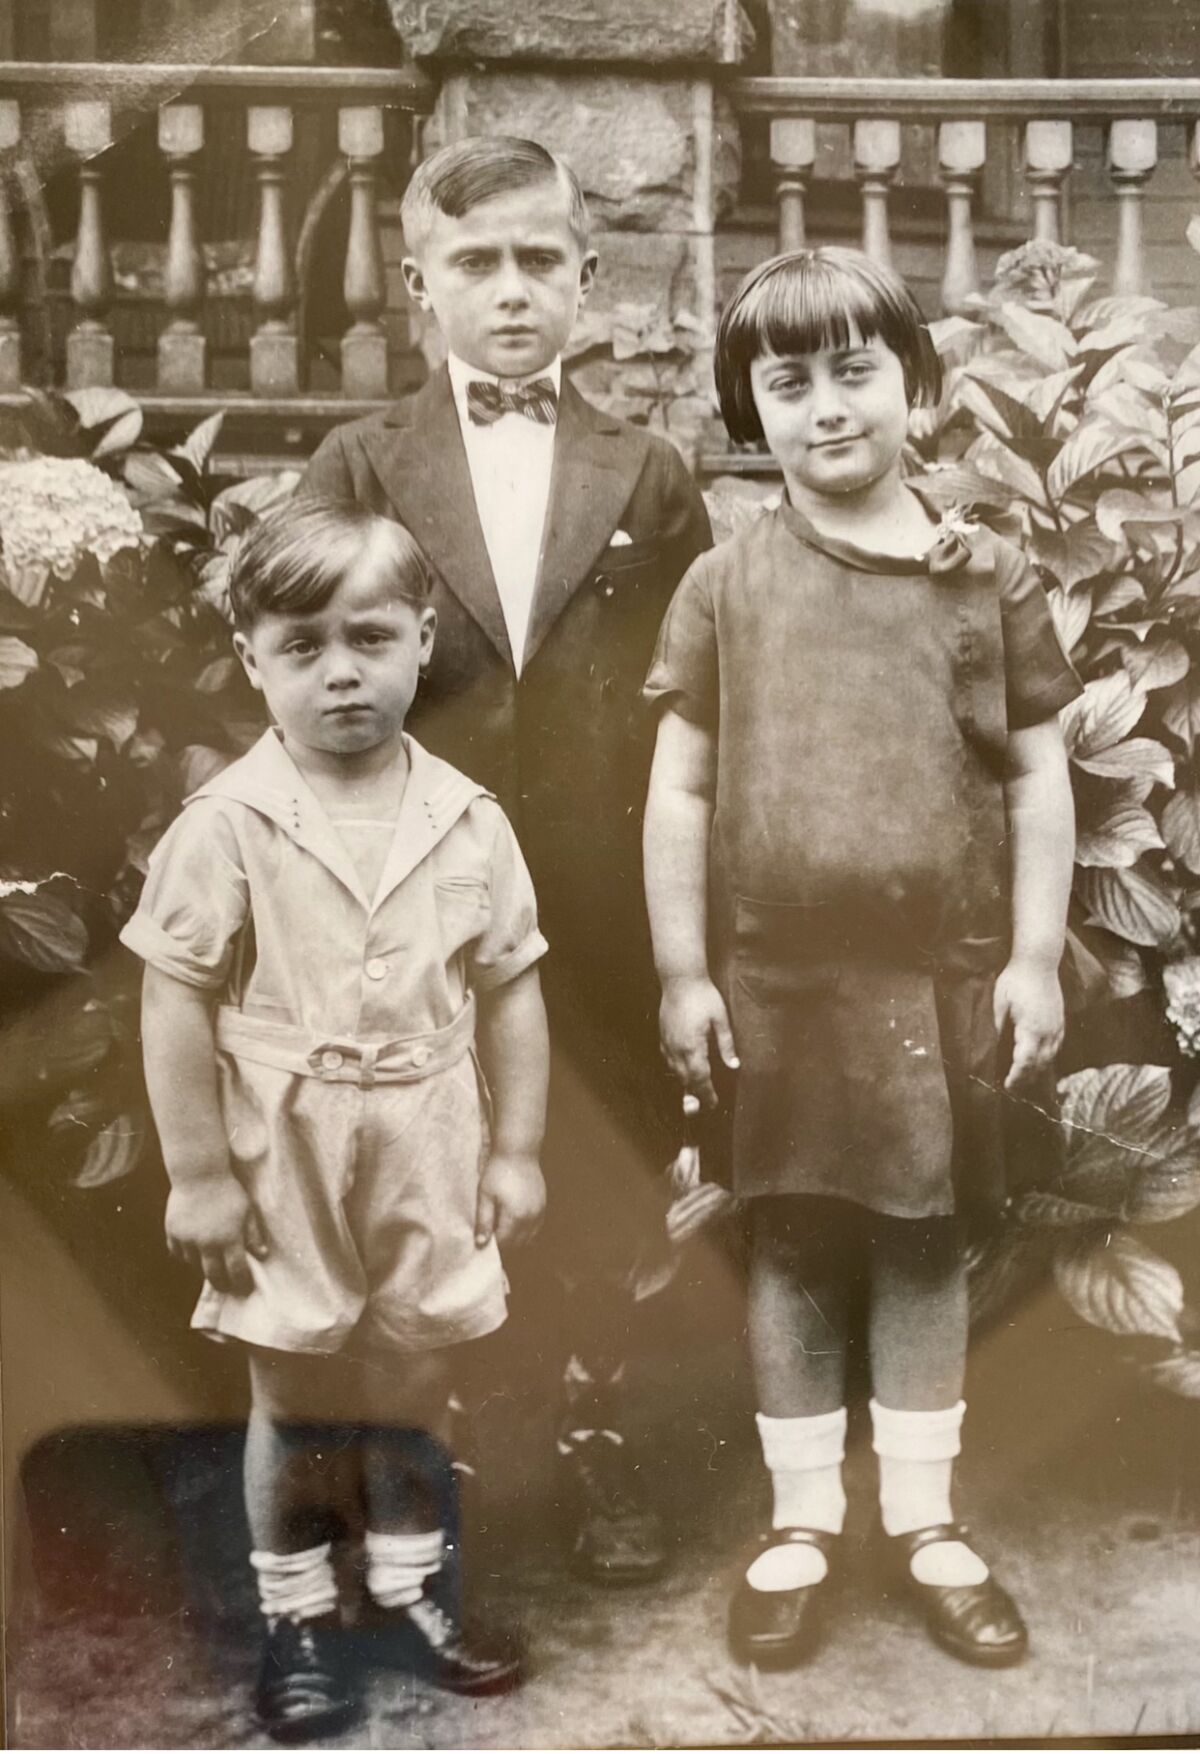 Erv Polster with his younger brother and sister around 1929.